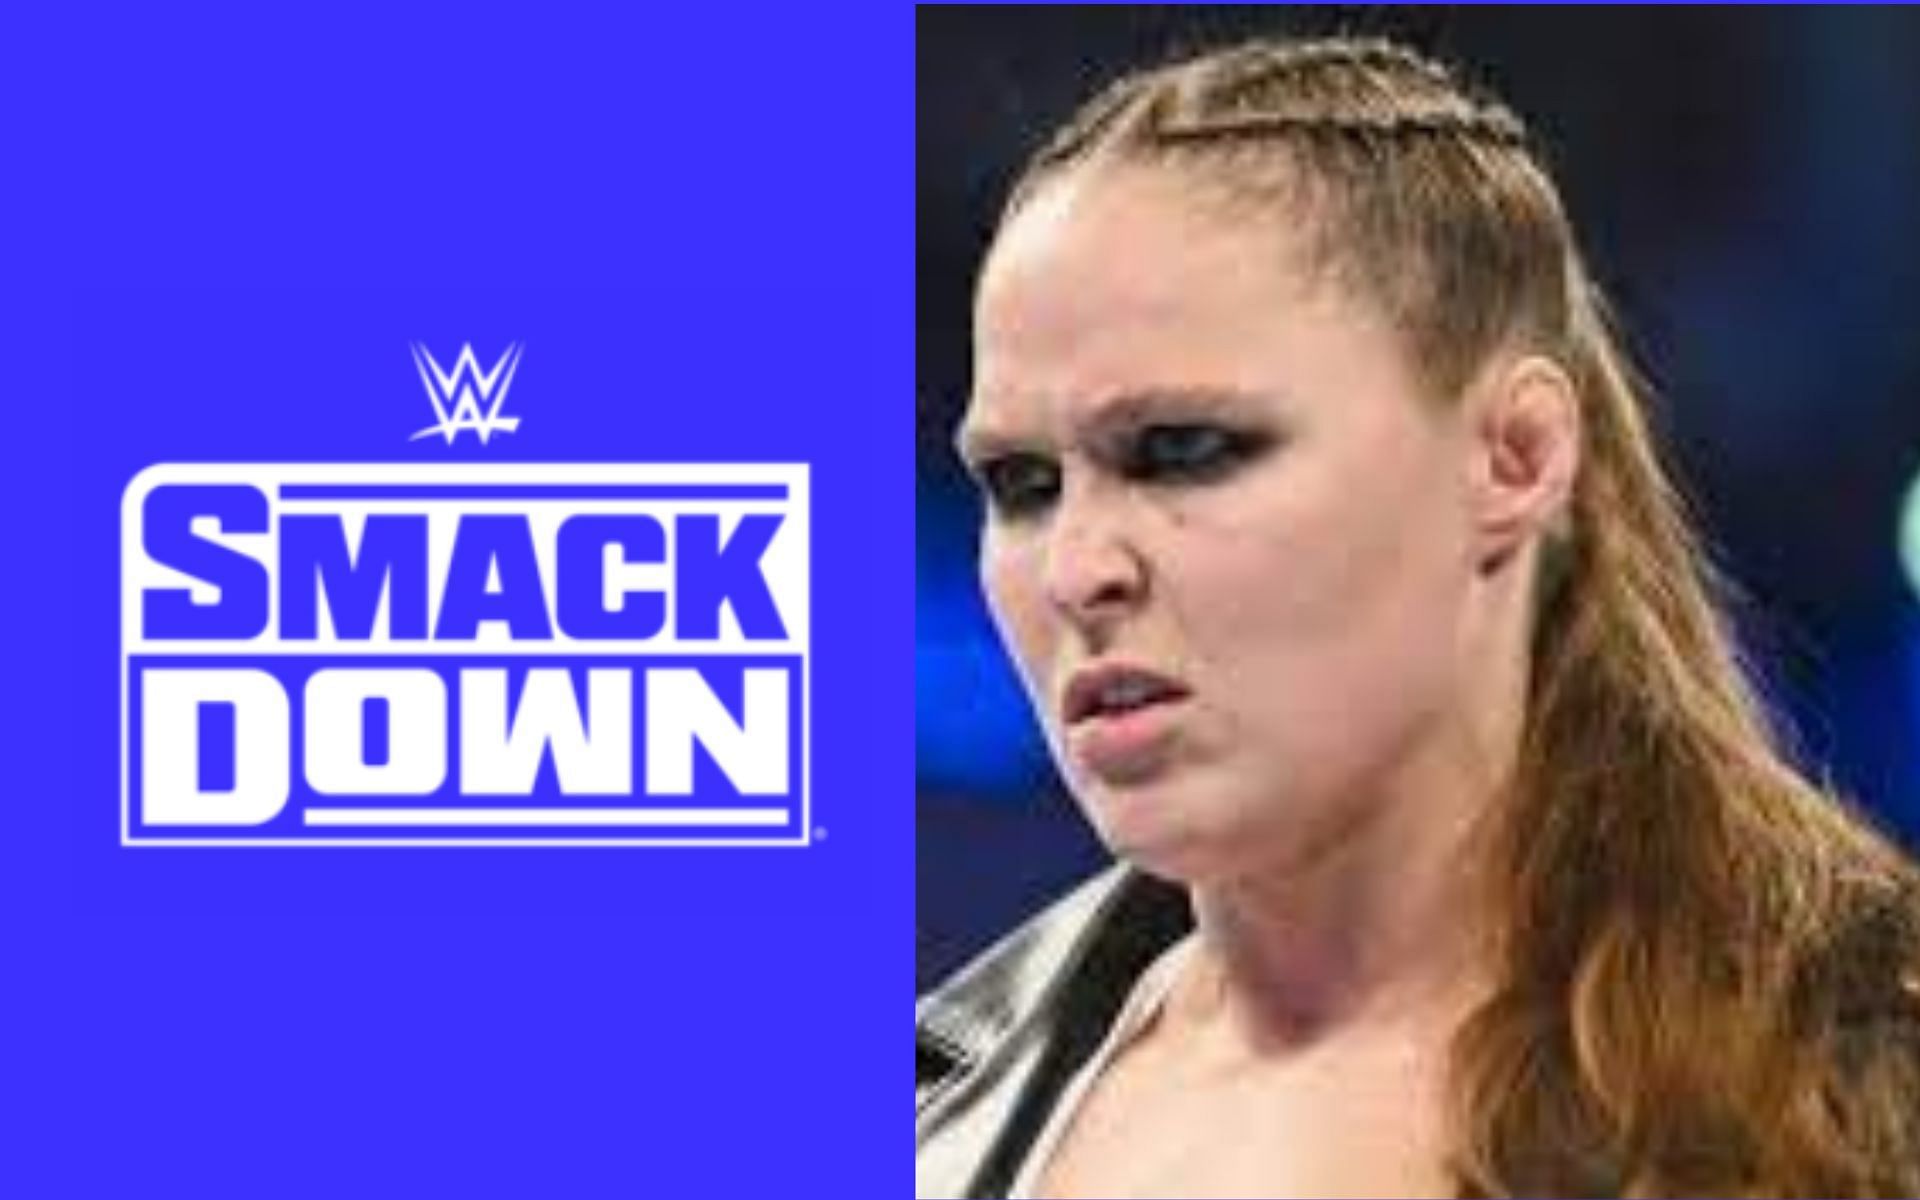 Ronda Rousey is set to defend her title at Money in the Bank